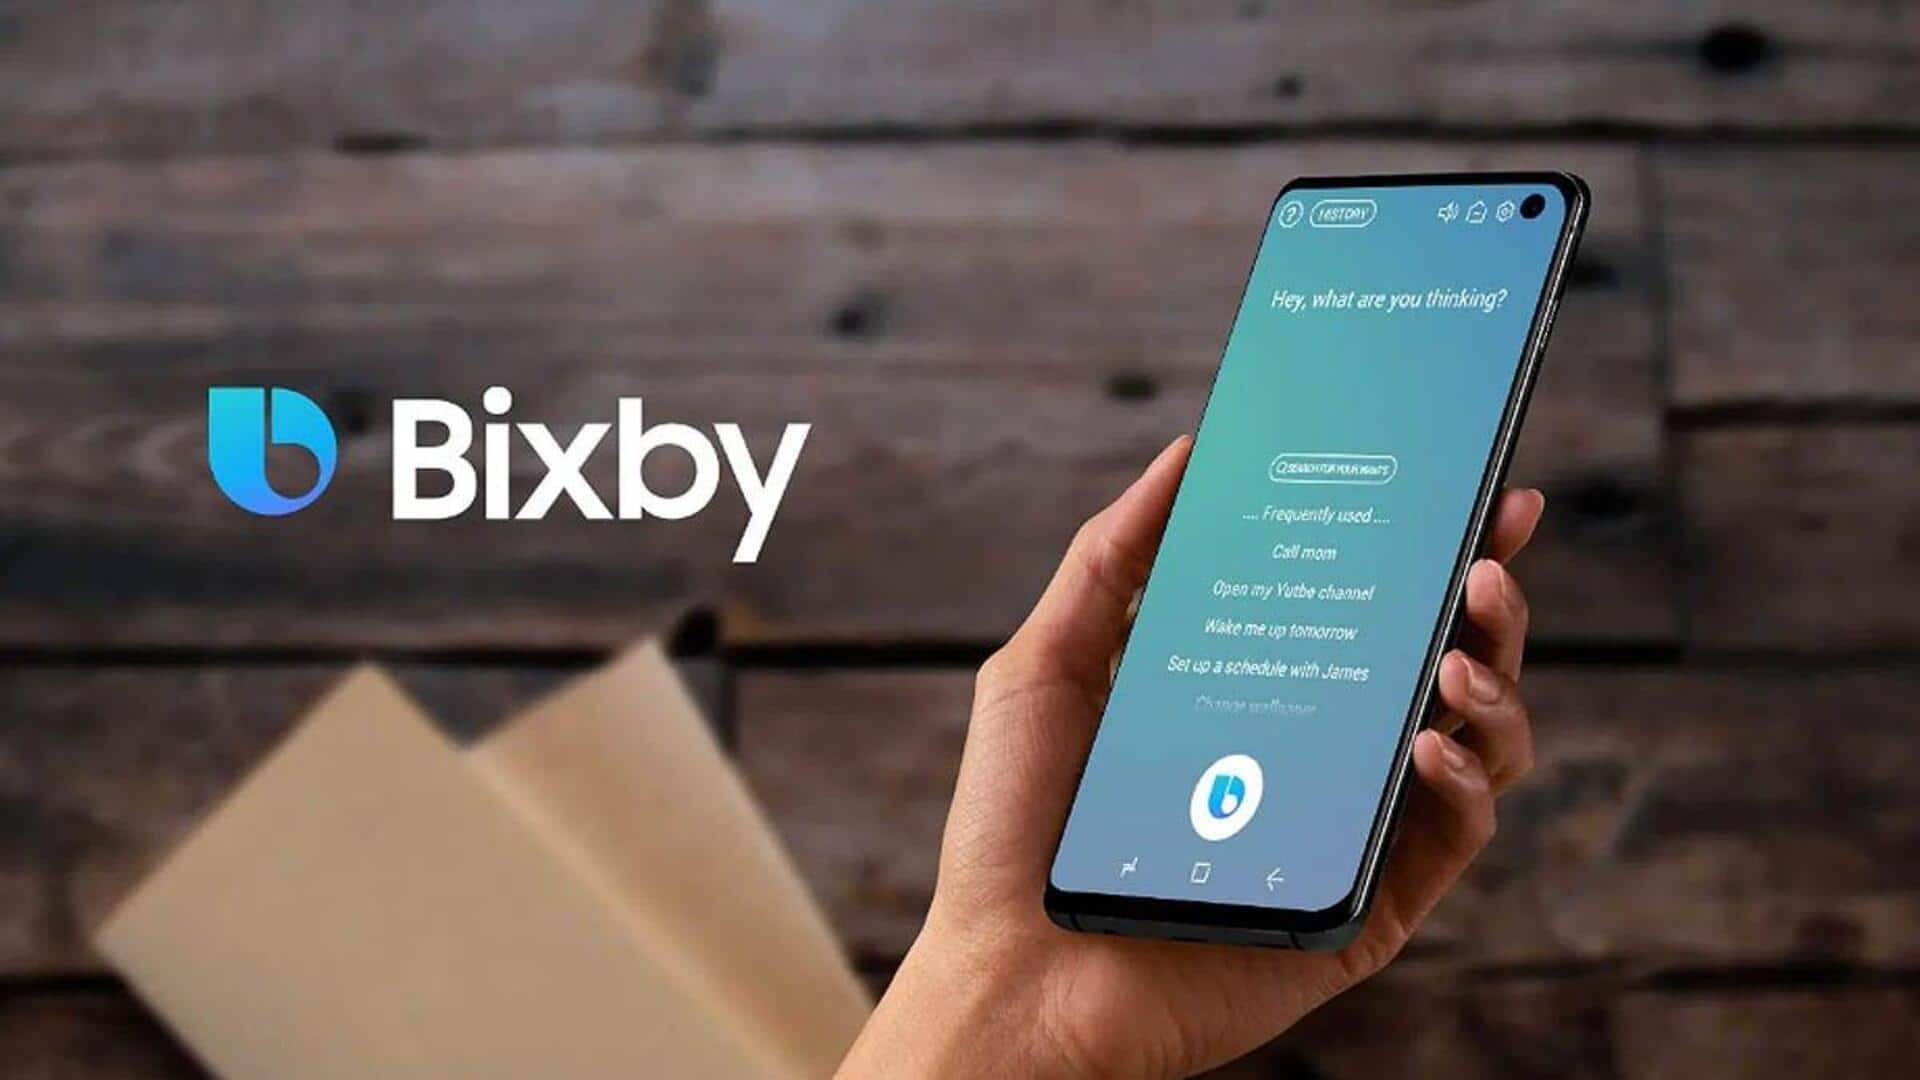 Samsung reaffirms commitment to Bixby amid speculation about its future